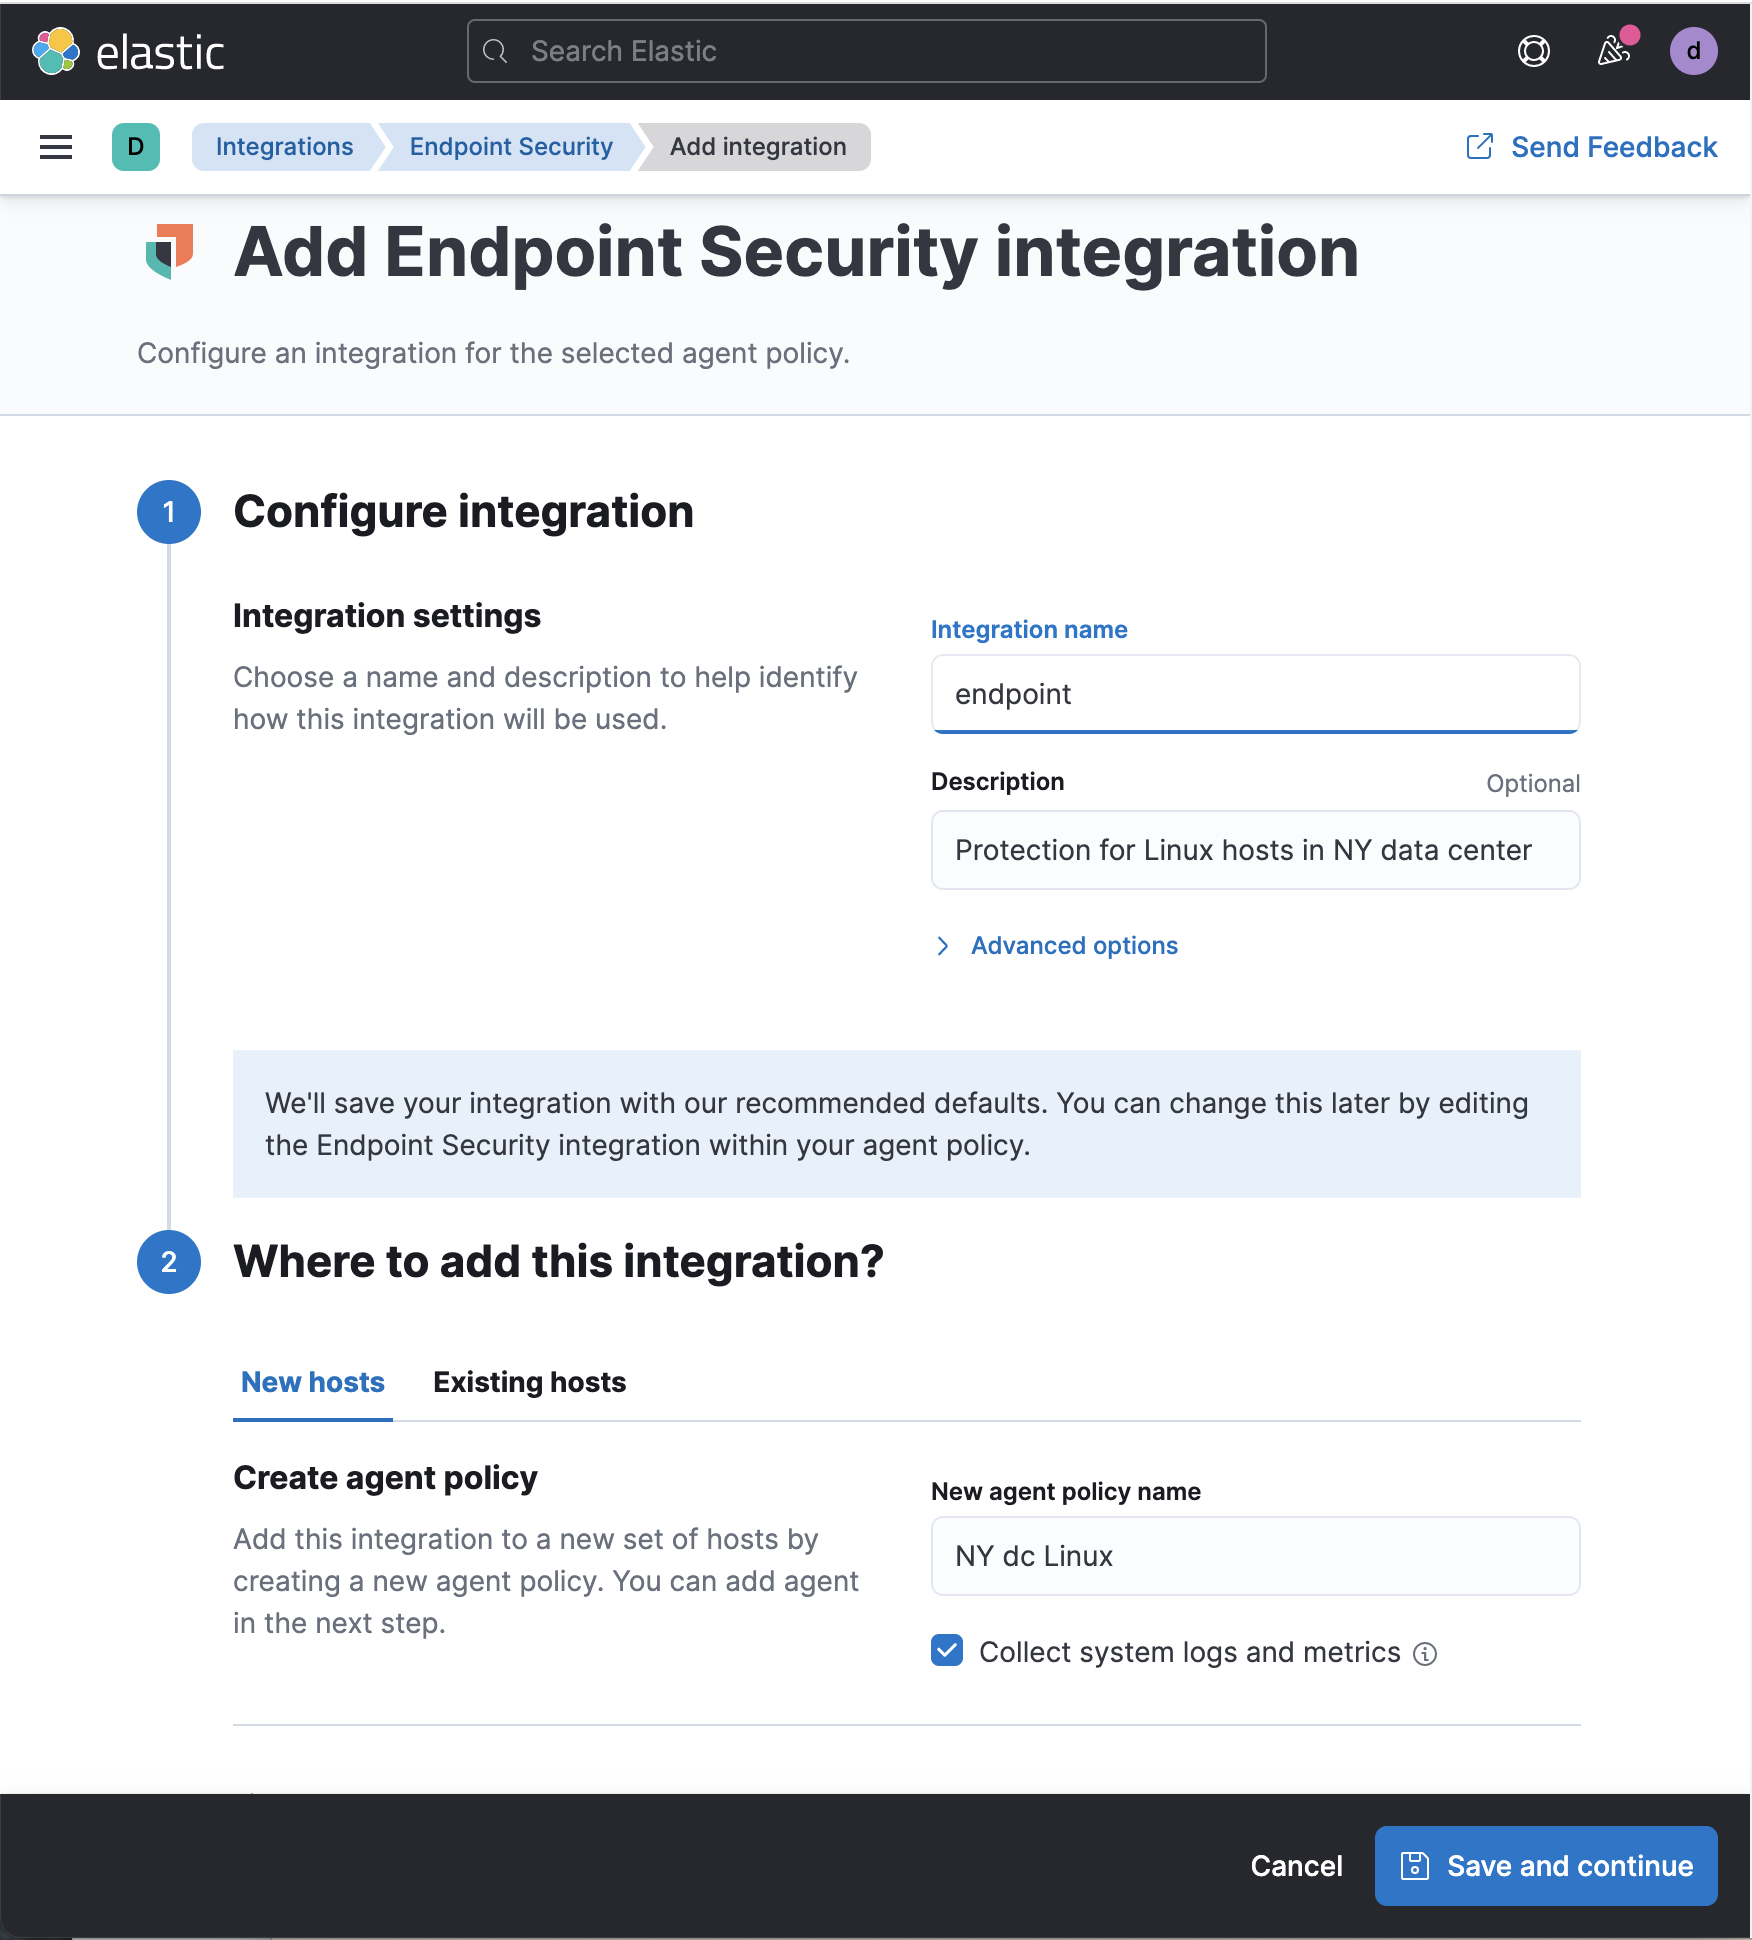 Configuration page for adding an Endpoint Security integration